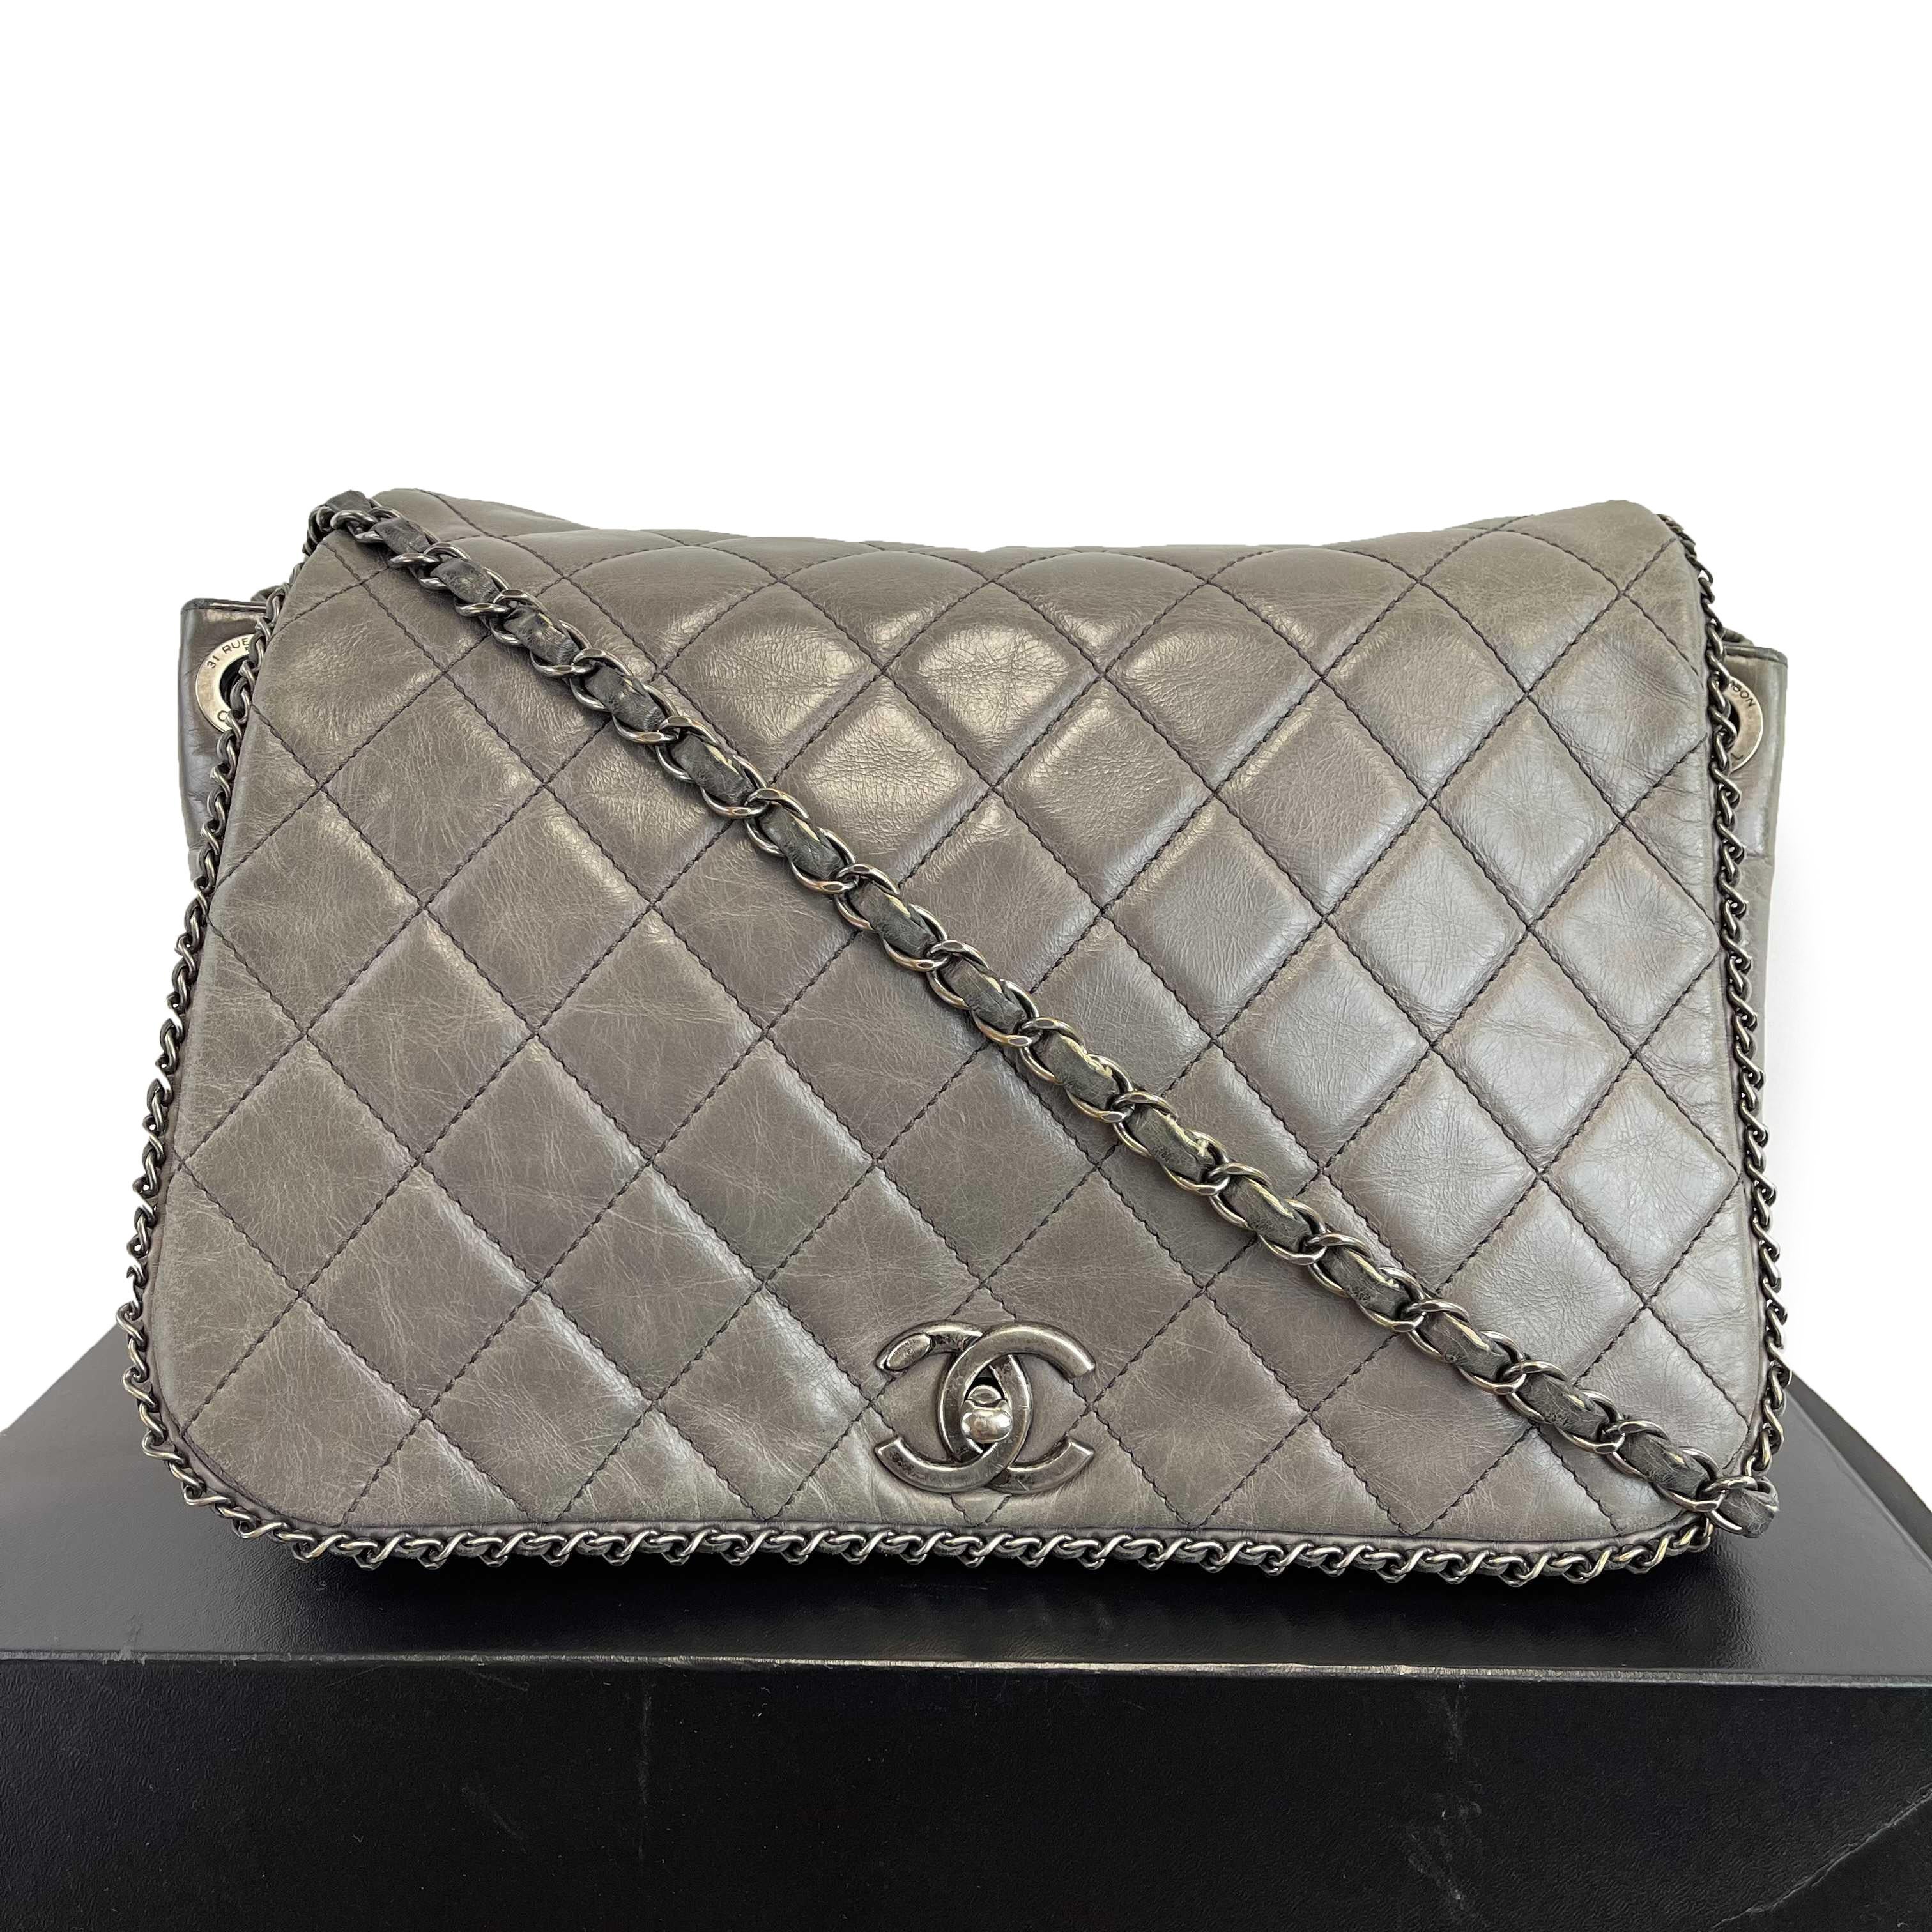 CHANEL - Calfskin Quilted Large CC Enchained Accordion - Gray Shoulder Bag For Sale 5